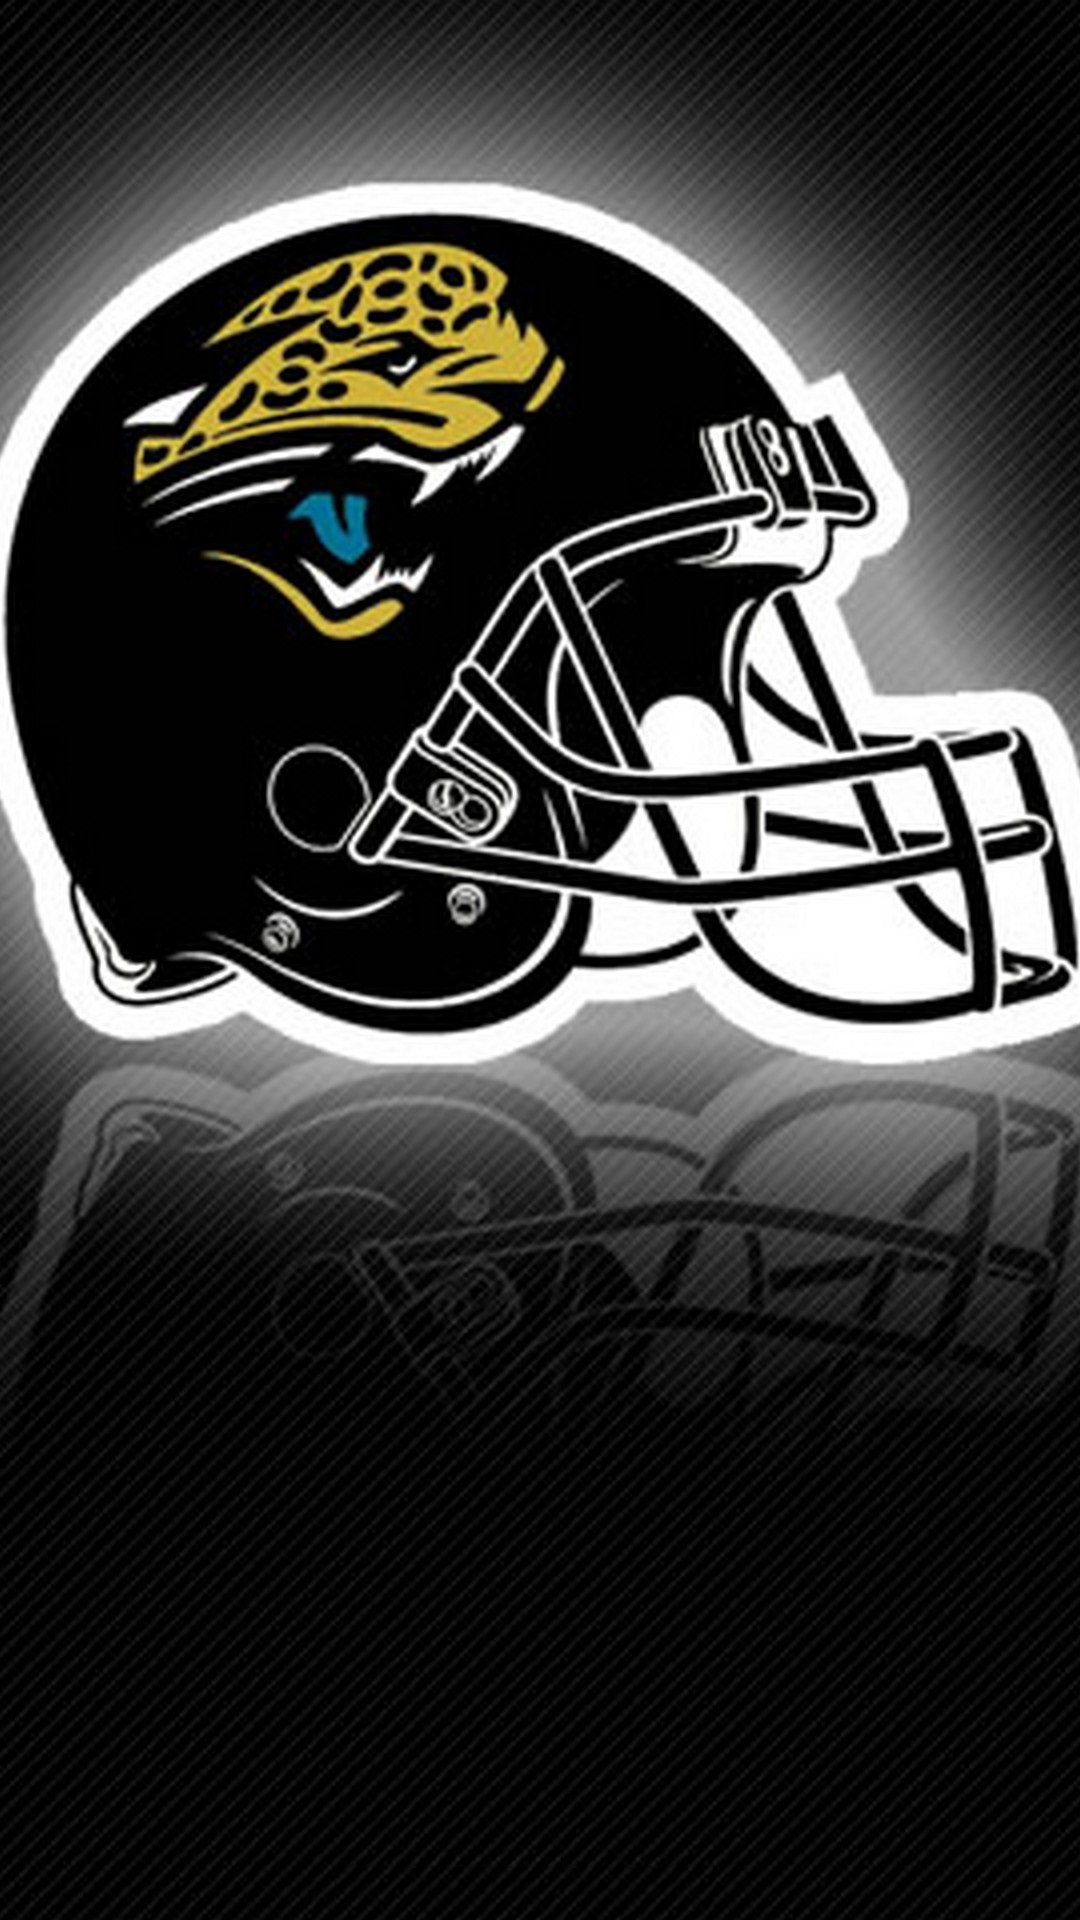 Wallpapers iPhone Jacksonville Jaguars NFL With high-resolution 1080X1920 pixel. Donwload and set as wallpaper for your iPhone X, iPhone XS home screen backgrounds, XS Max, XR, iPhone8 lock screen wallpaper, iPhone 7, 6, SE, and other mobile devices